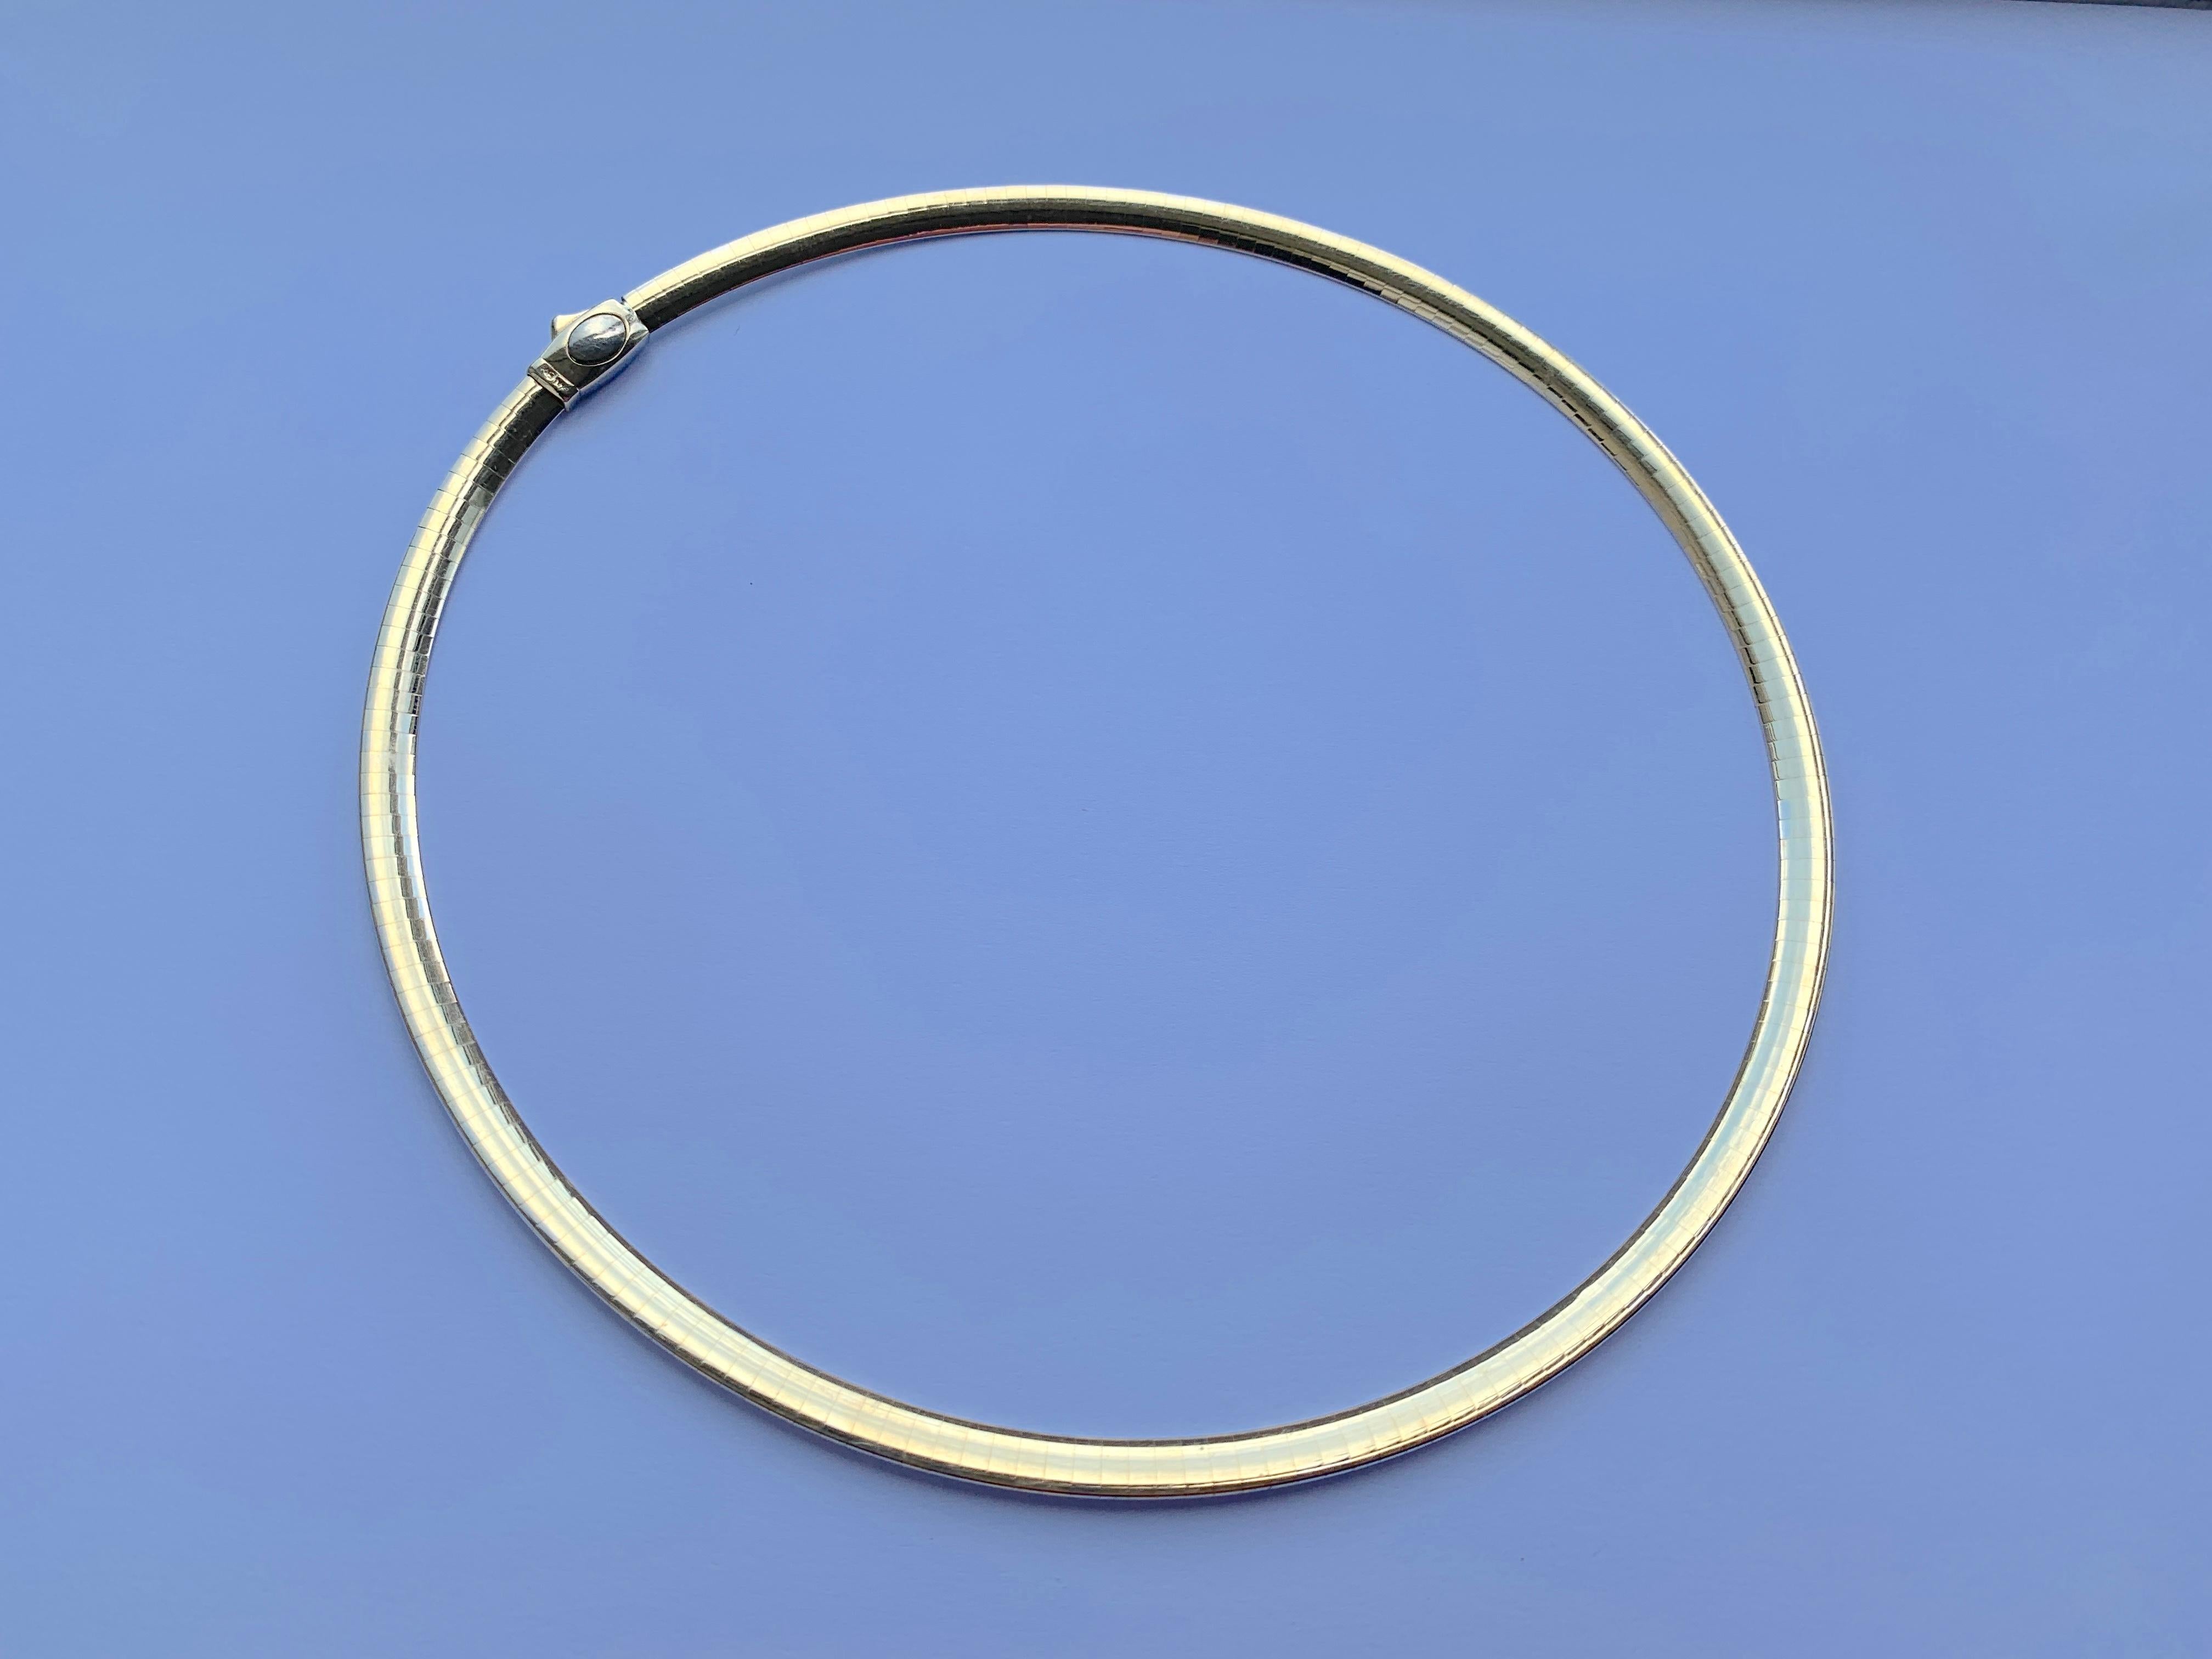 14ct 585 Gold Elegant Contemporary Choker
Its has yellow gold on one side and White Gold on the Other
smooth to the touch - highly polished surface

Size - inner Diameter 12.4 cm : 4.9